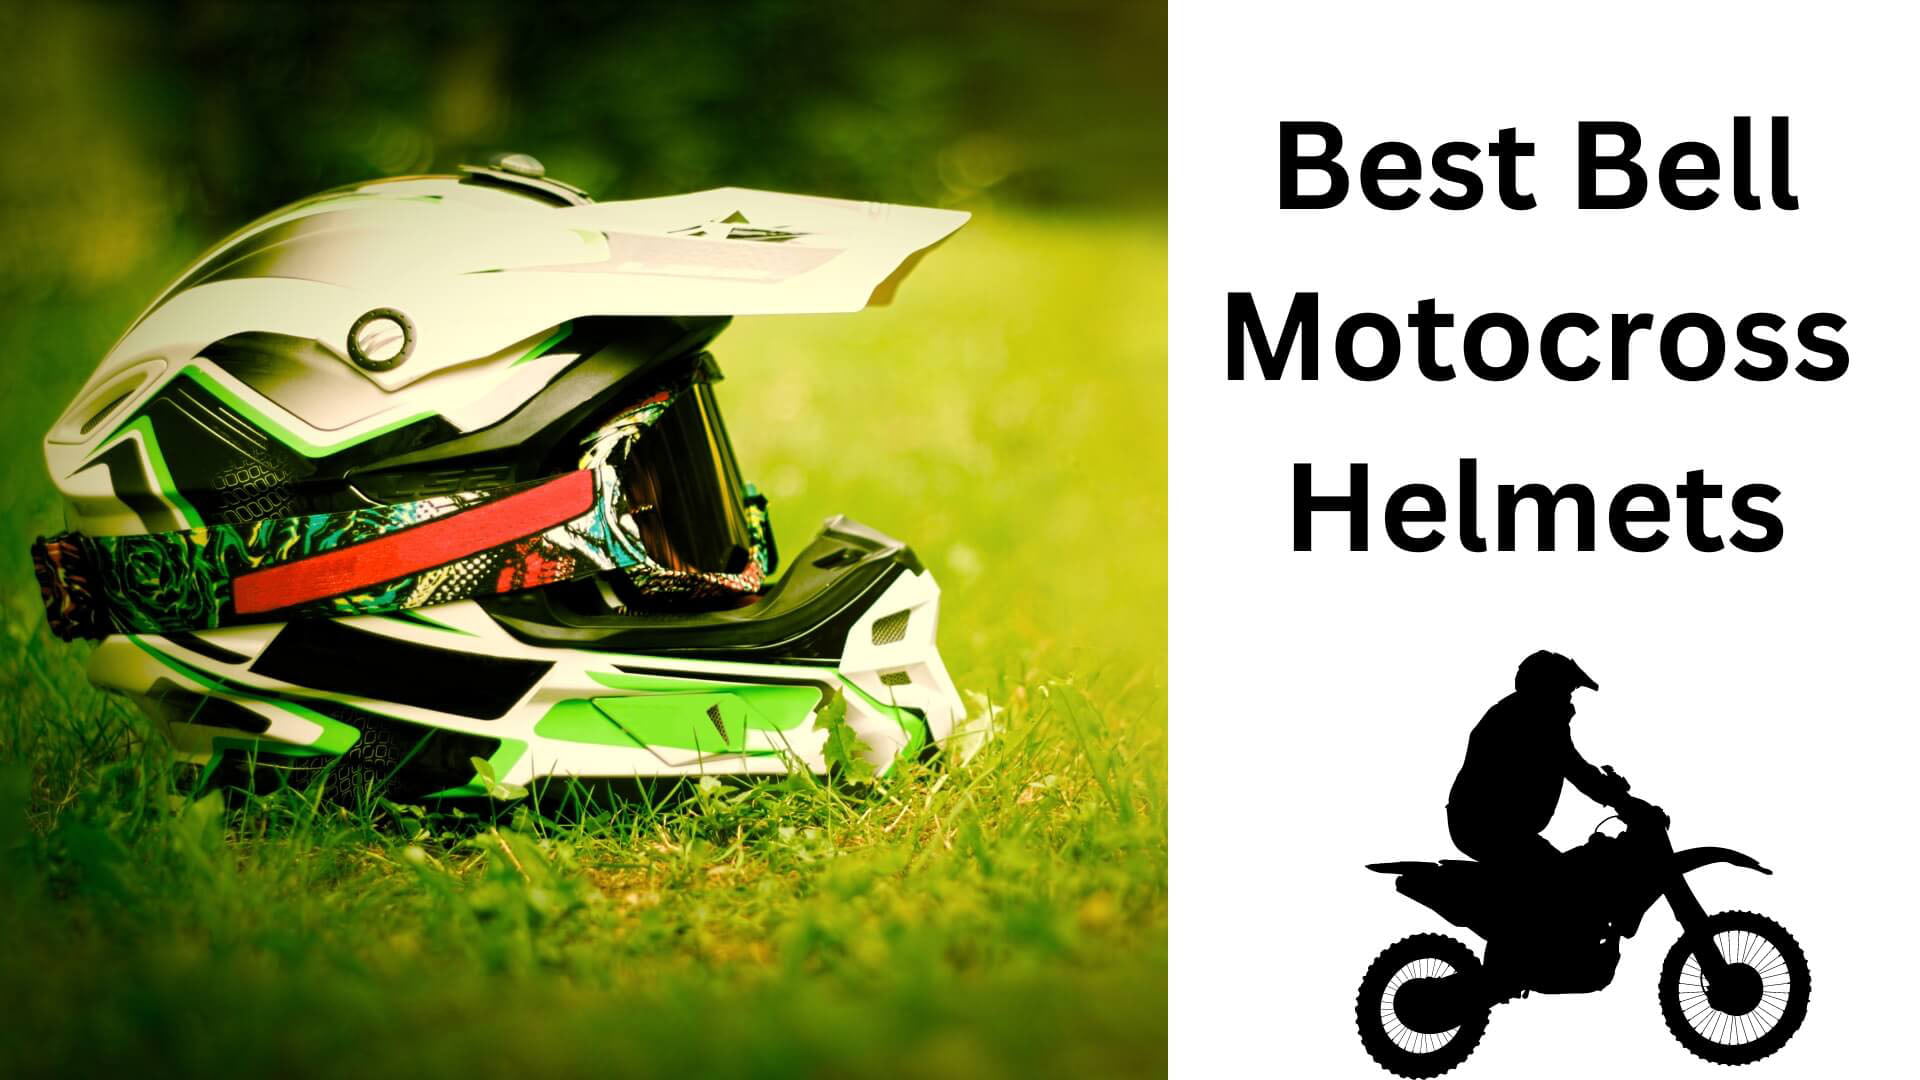 The Best Bell MotoCross Helmets For The Safety And Comfort Of Your Ride